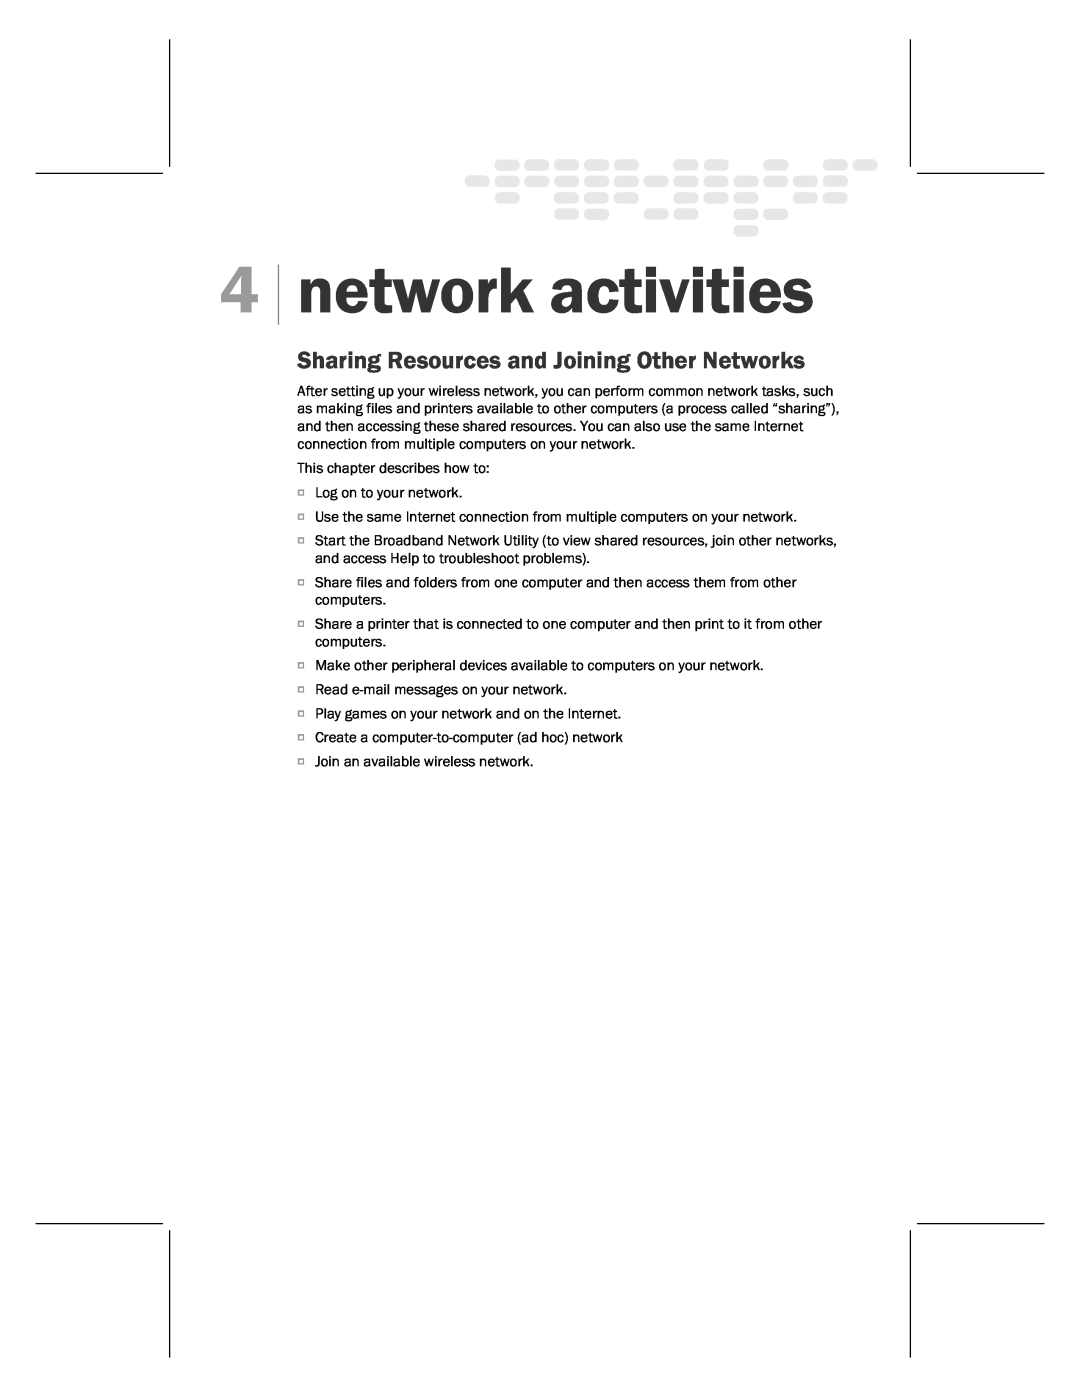 Microsoft MN-820 manual network activities, Sharing Resources and Joining Other Networks 